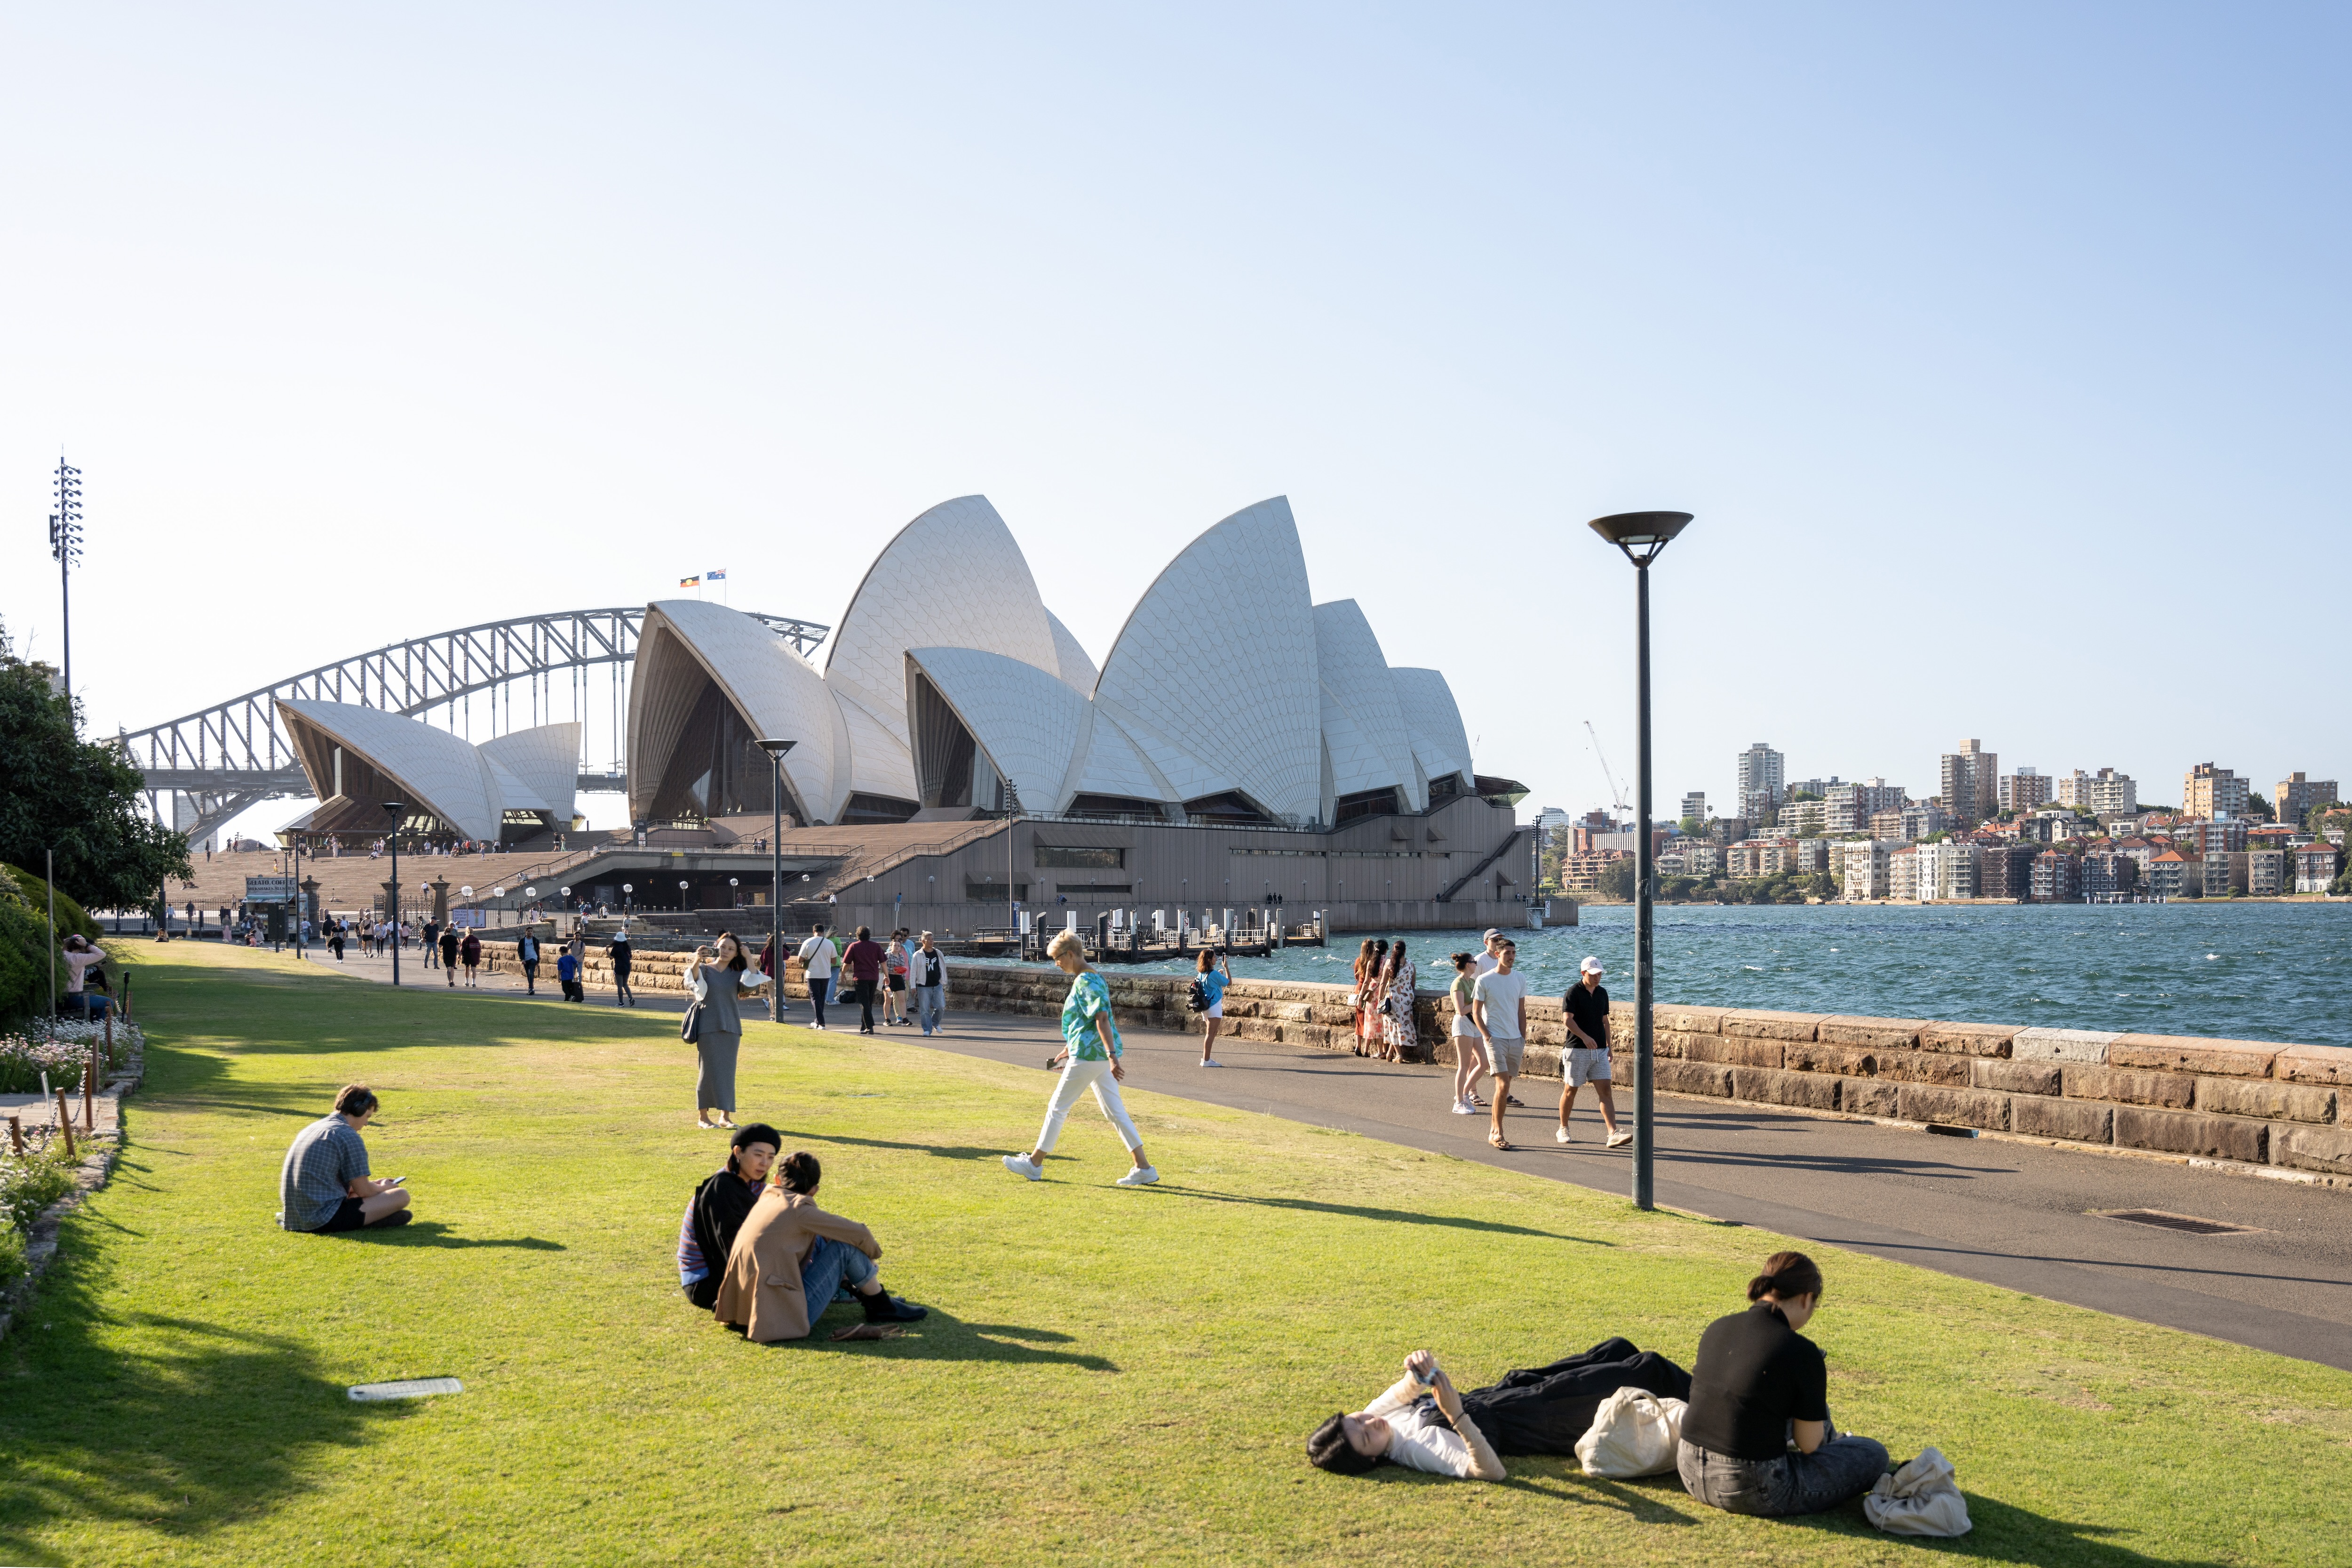 Let yourself to be charmed by the timeless beauty of the iconic Harbour Bridge and the Sydney Opera House